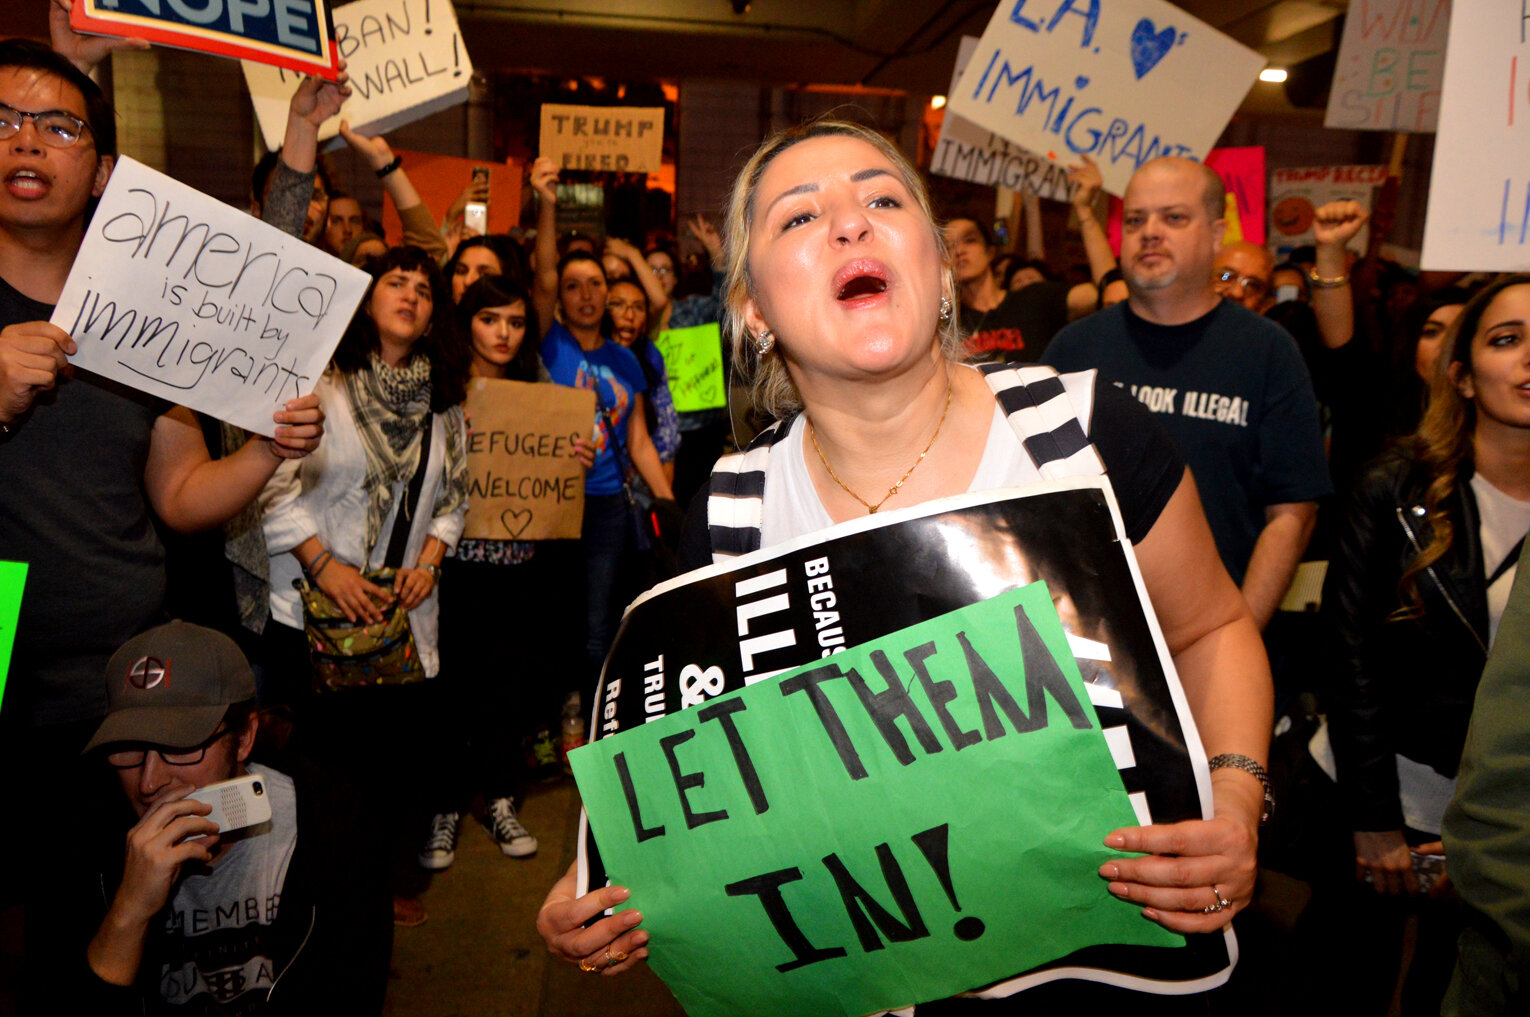  PROTEST AGAINST PRESIDENT TRUMP’S MUSLIM TRAVEL BAN, LAX, Los Angeles, 2017 